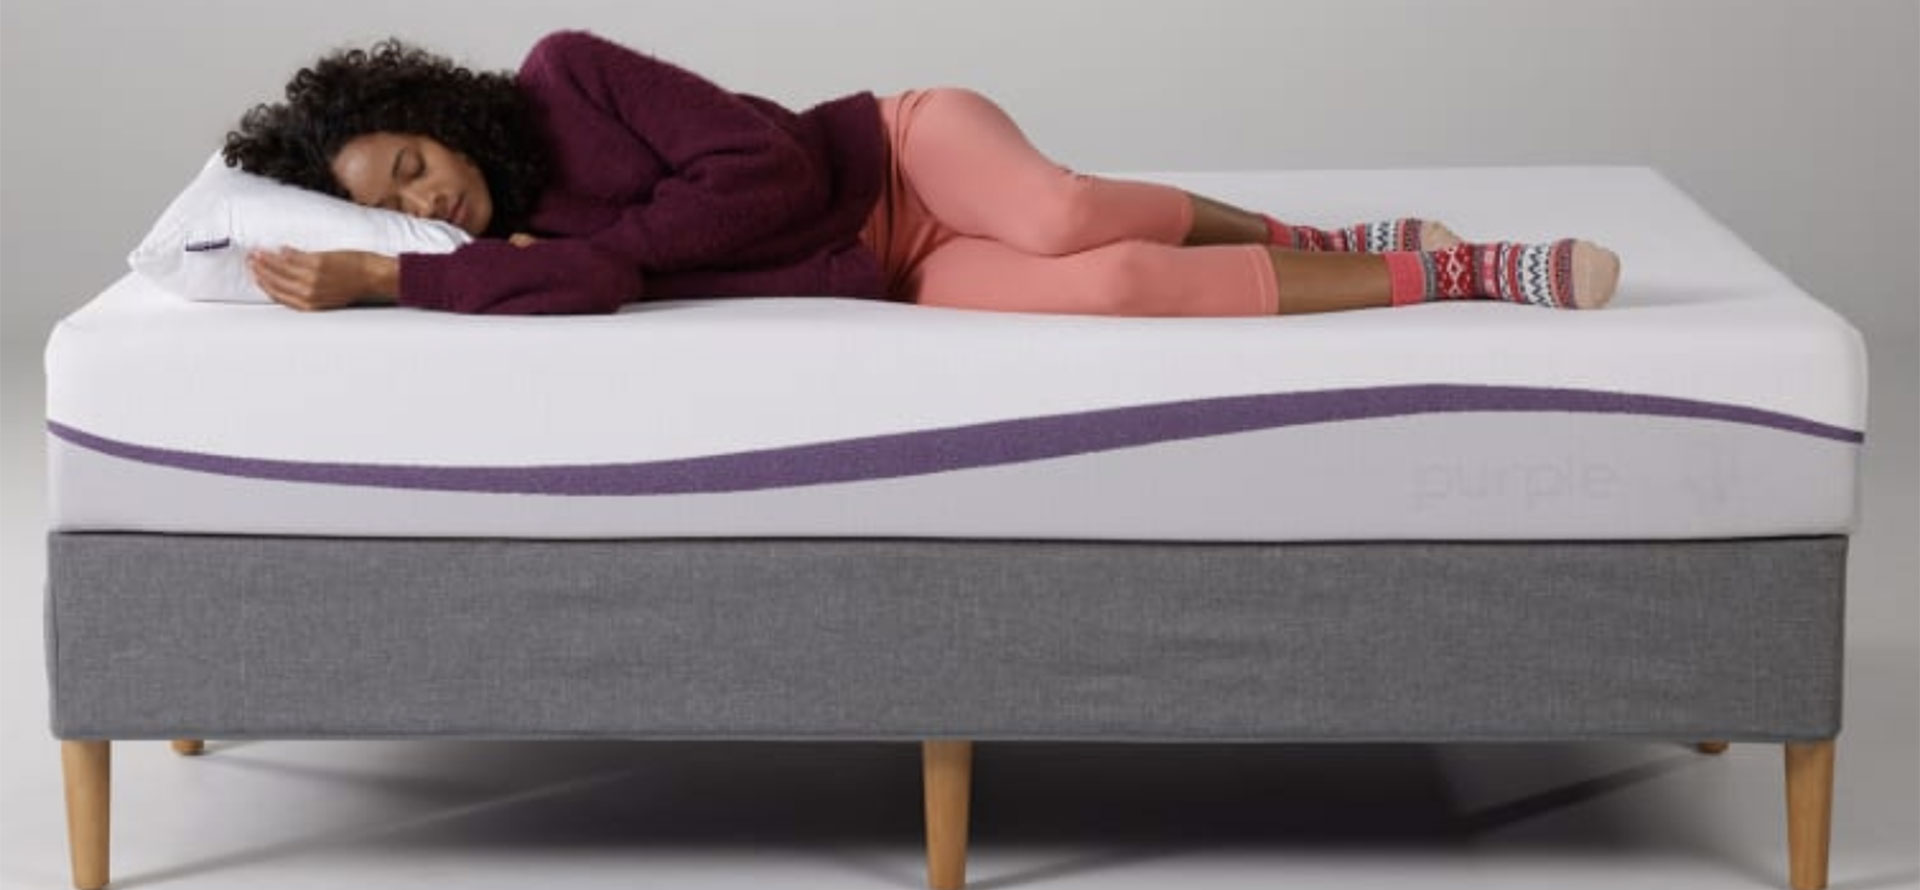 Woman with herniated disc on mattress.